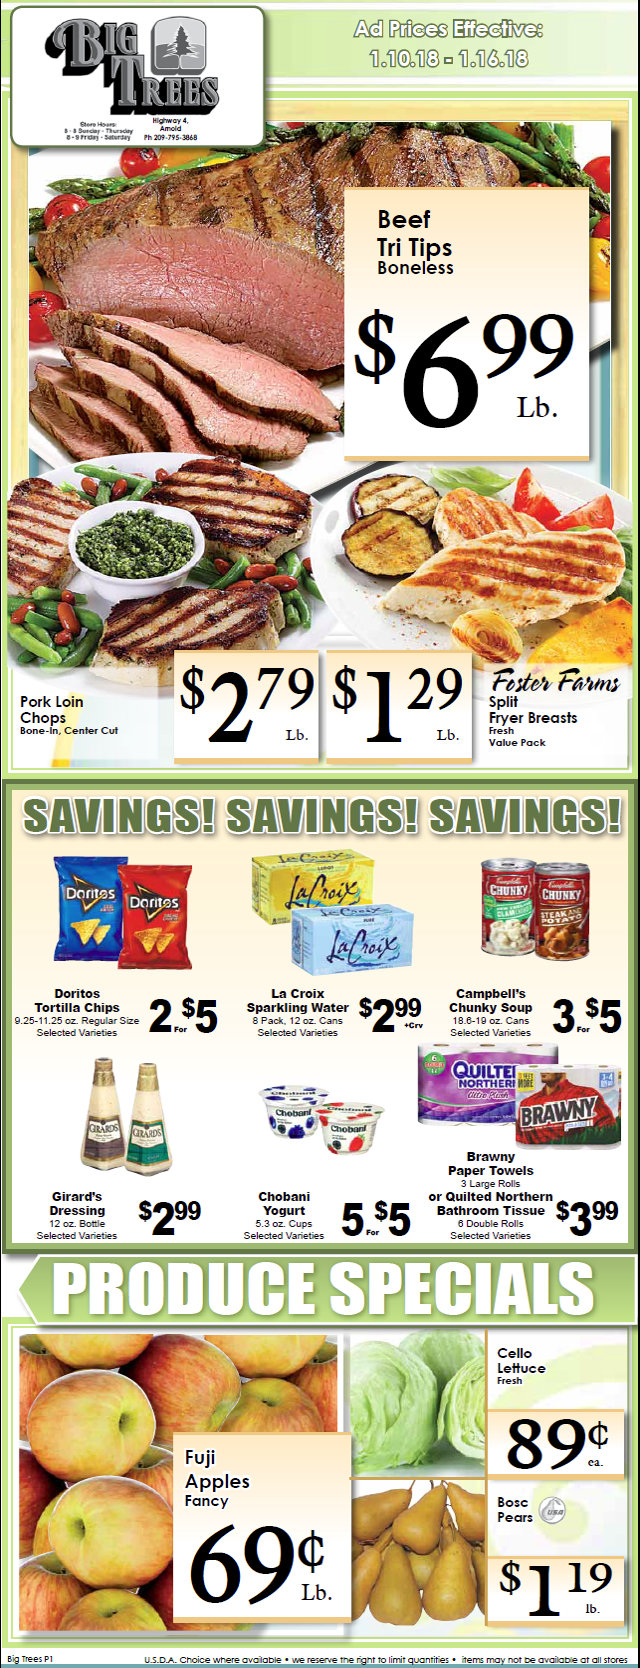 Big Trees Market Weekly Ad & Specials Through January 16th